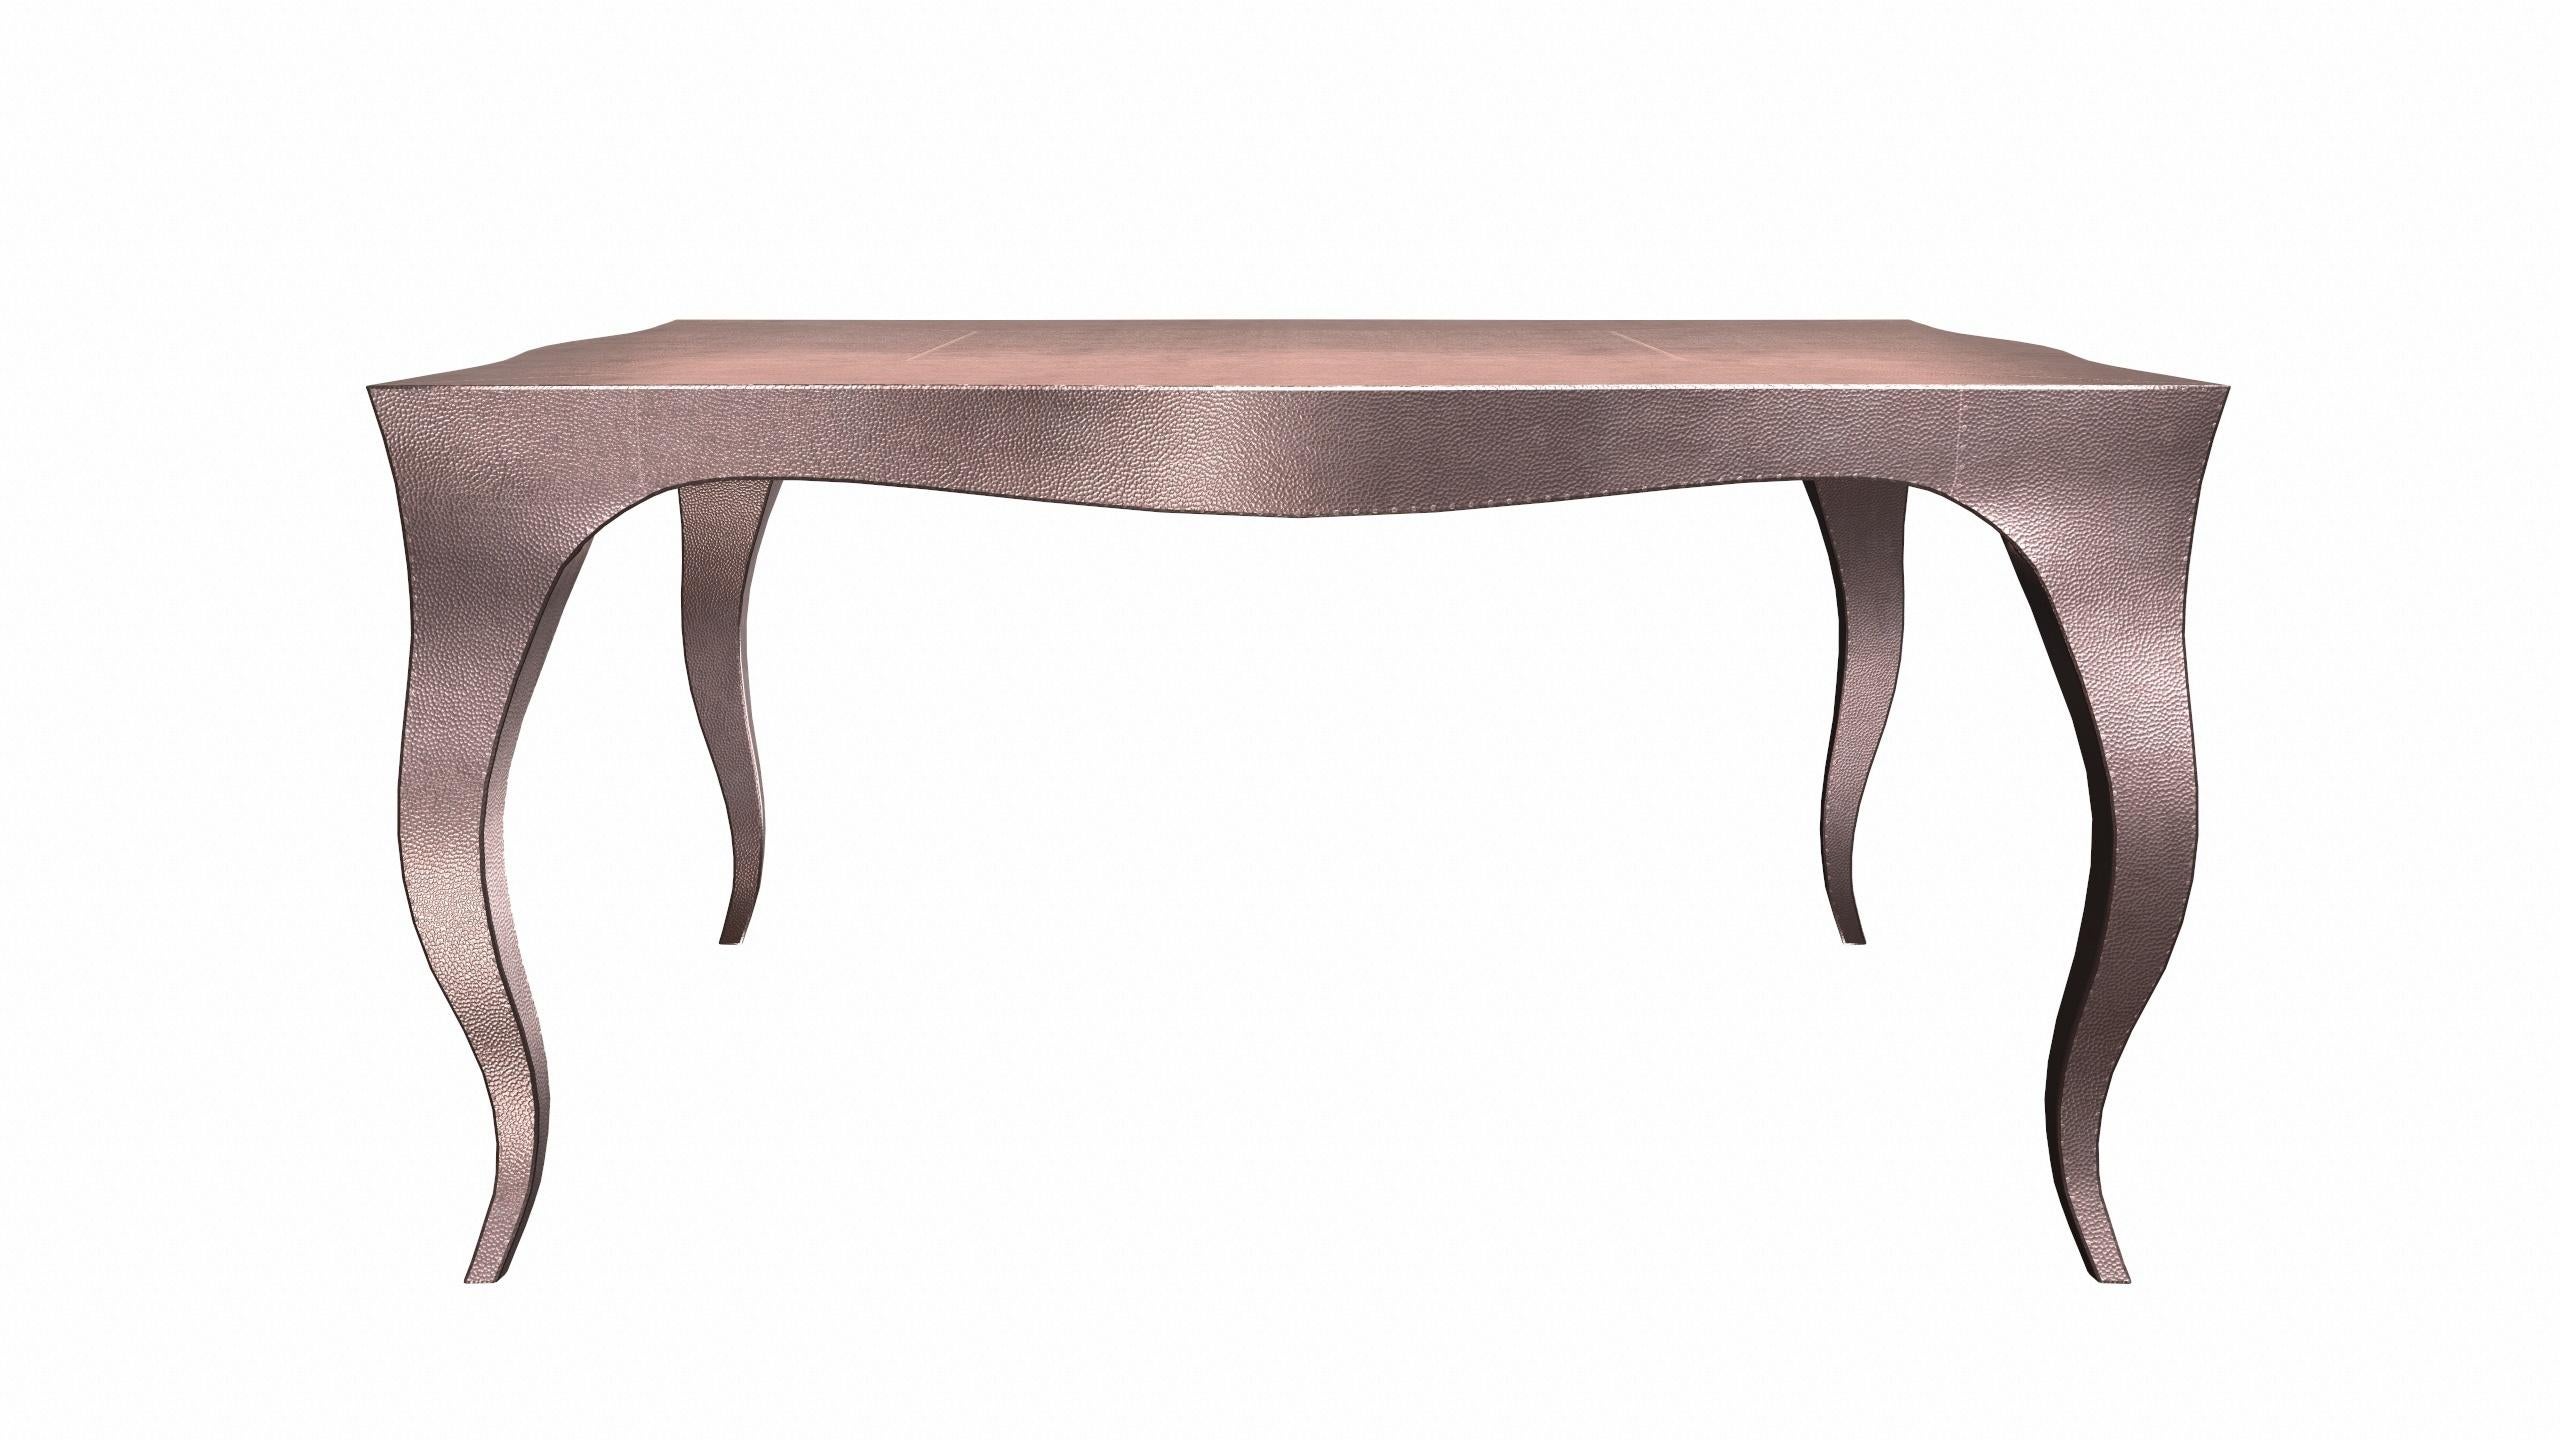 American Louise Art Deco Card Tables and Tea Tables Mid. Hammered Copper by Paul Mathieu For Sale